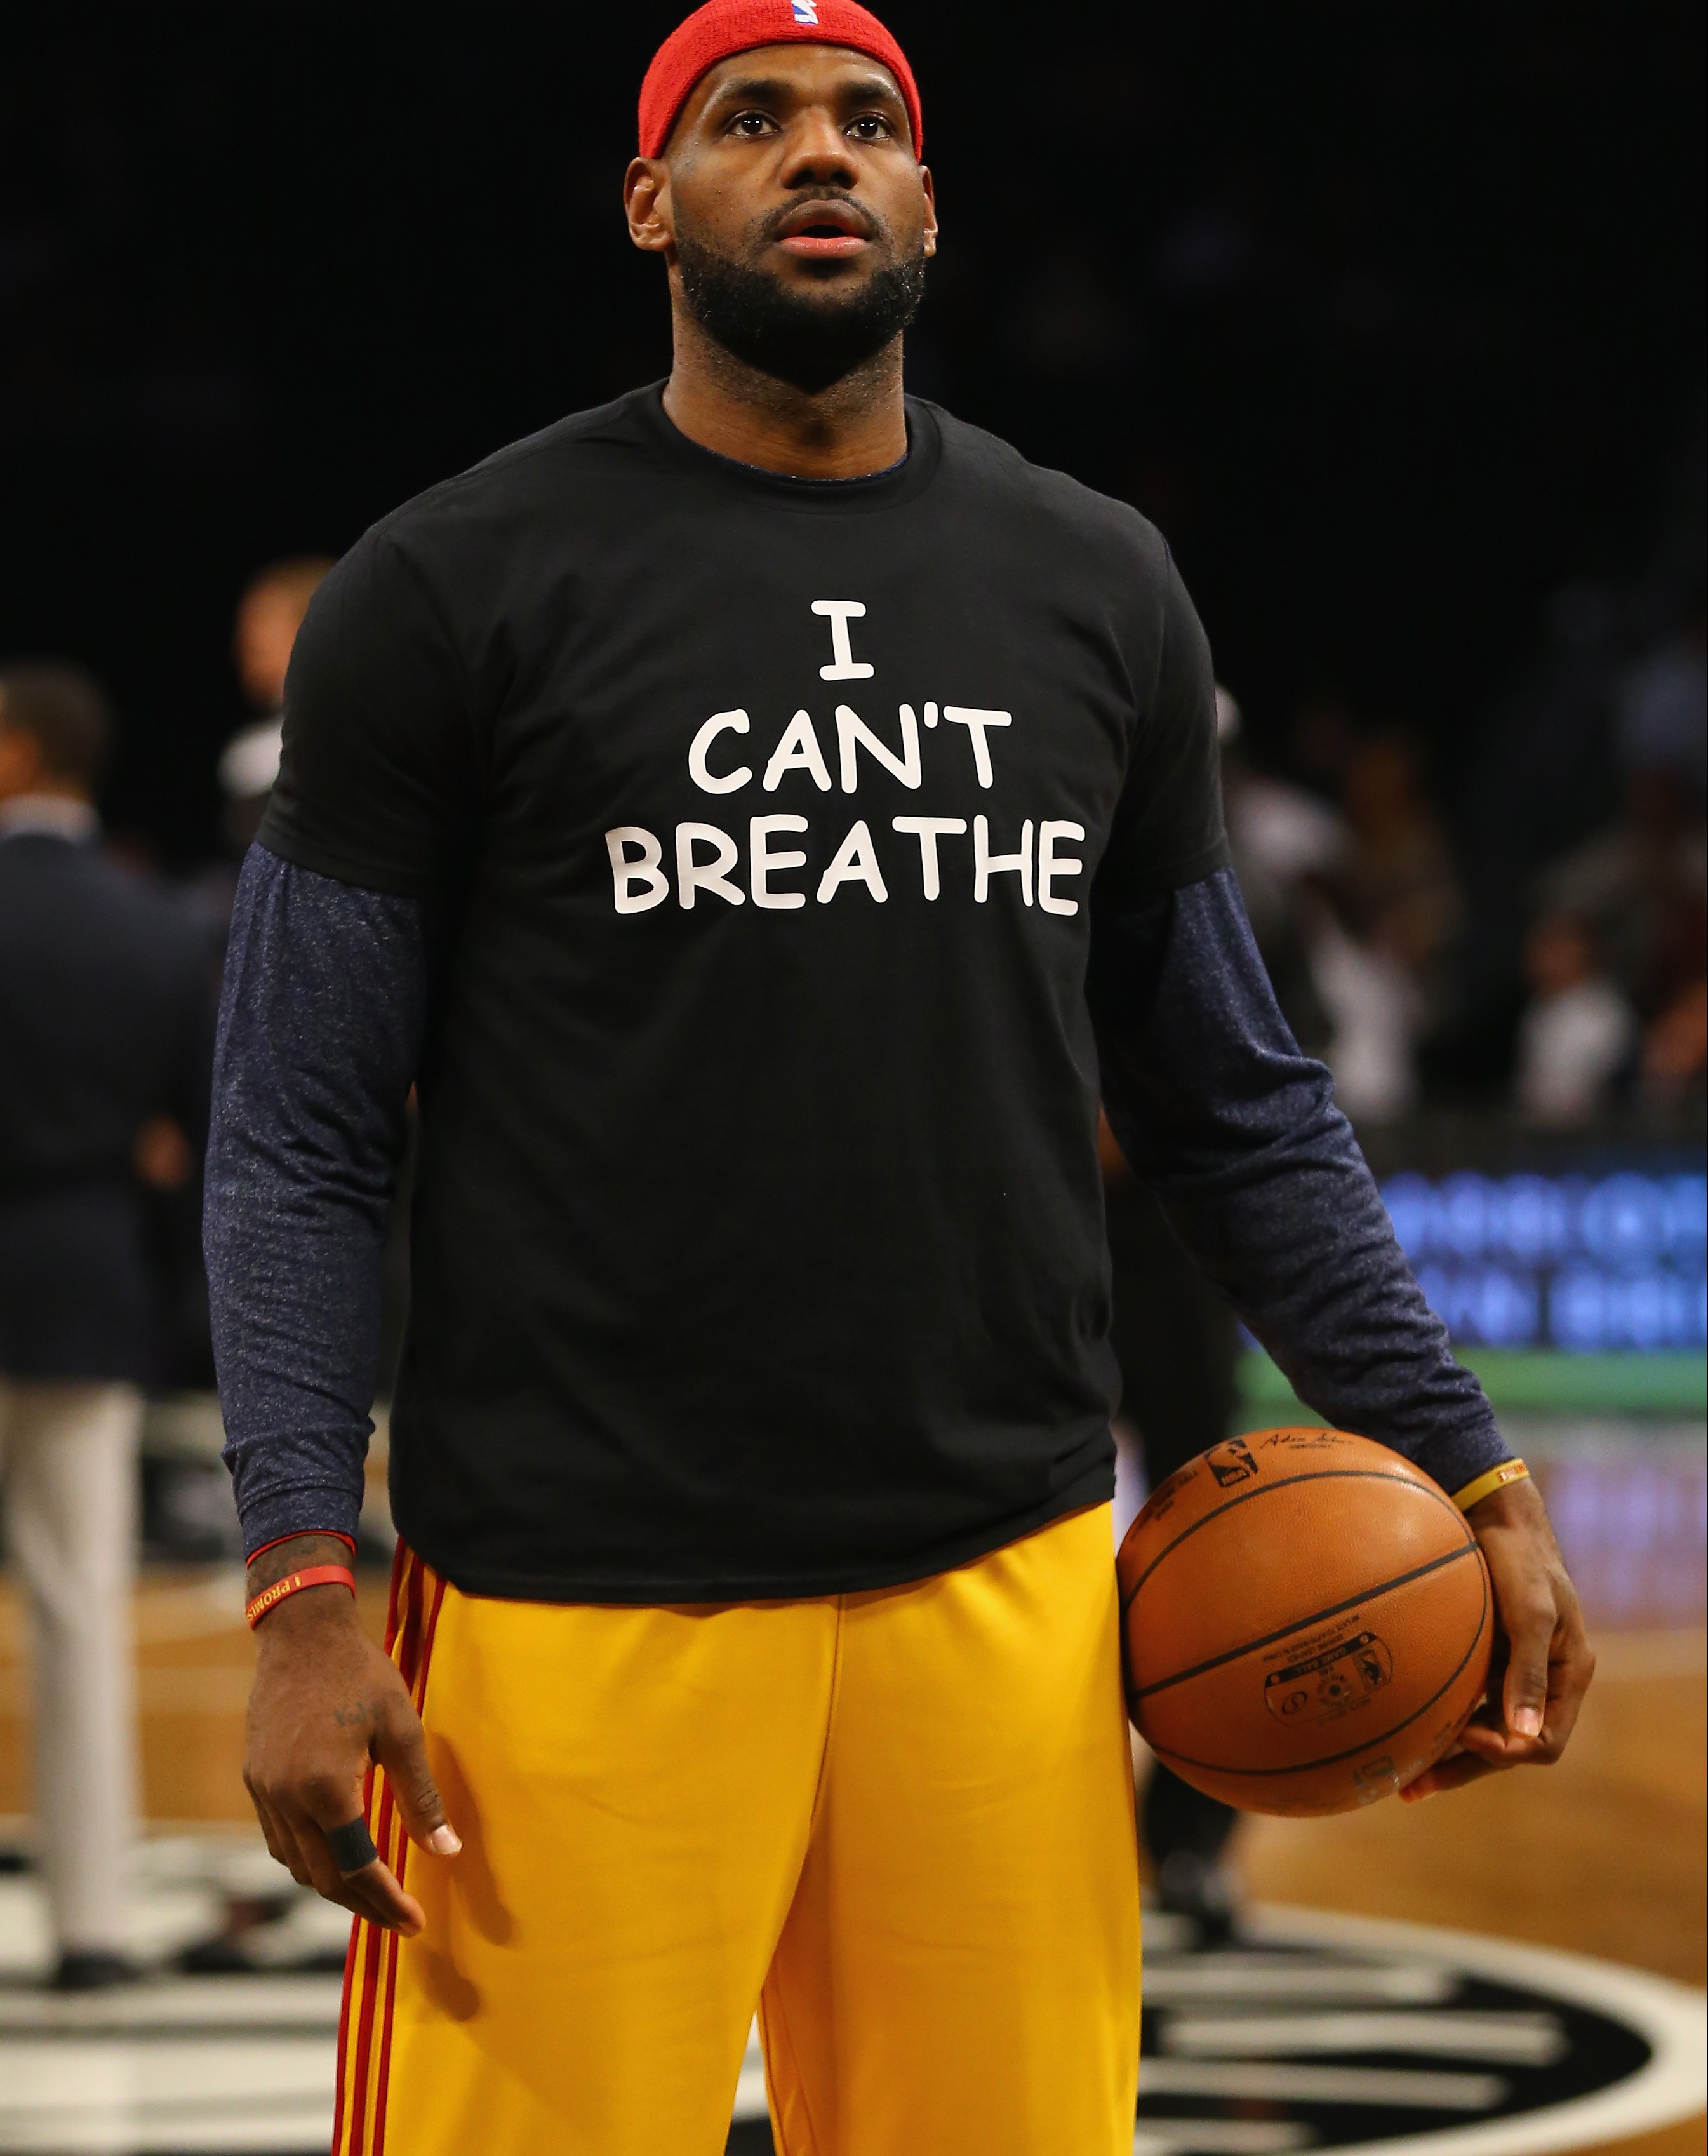 NEW YORK, NY - DECEMBER 08: LeBron James #23 of the Cleveland Cavaliers wears an 'I Can't Breathe' shirt during warmups before his game against the Brooklyn Nets during their game at the Barclays Center on December 8, 2014 in New York City. NOTE TO USER: User expressly acknowledges and agrees that, by downloading and or using this photograph, User is consenting to the terms and conditions of the Getty Images License Agreement. (Photo by Al Bello/Getty Images)